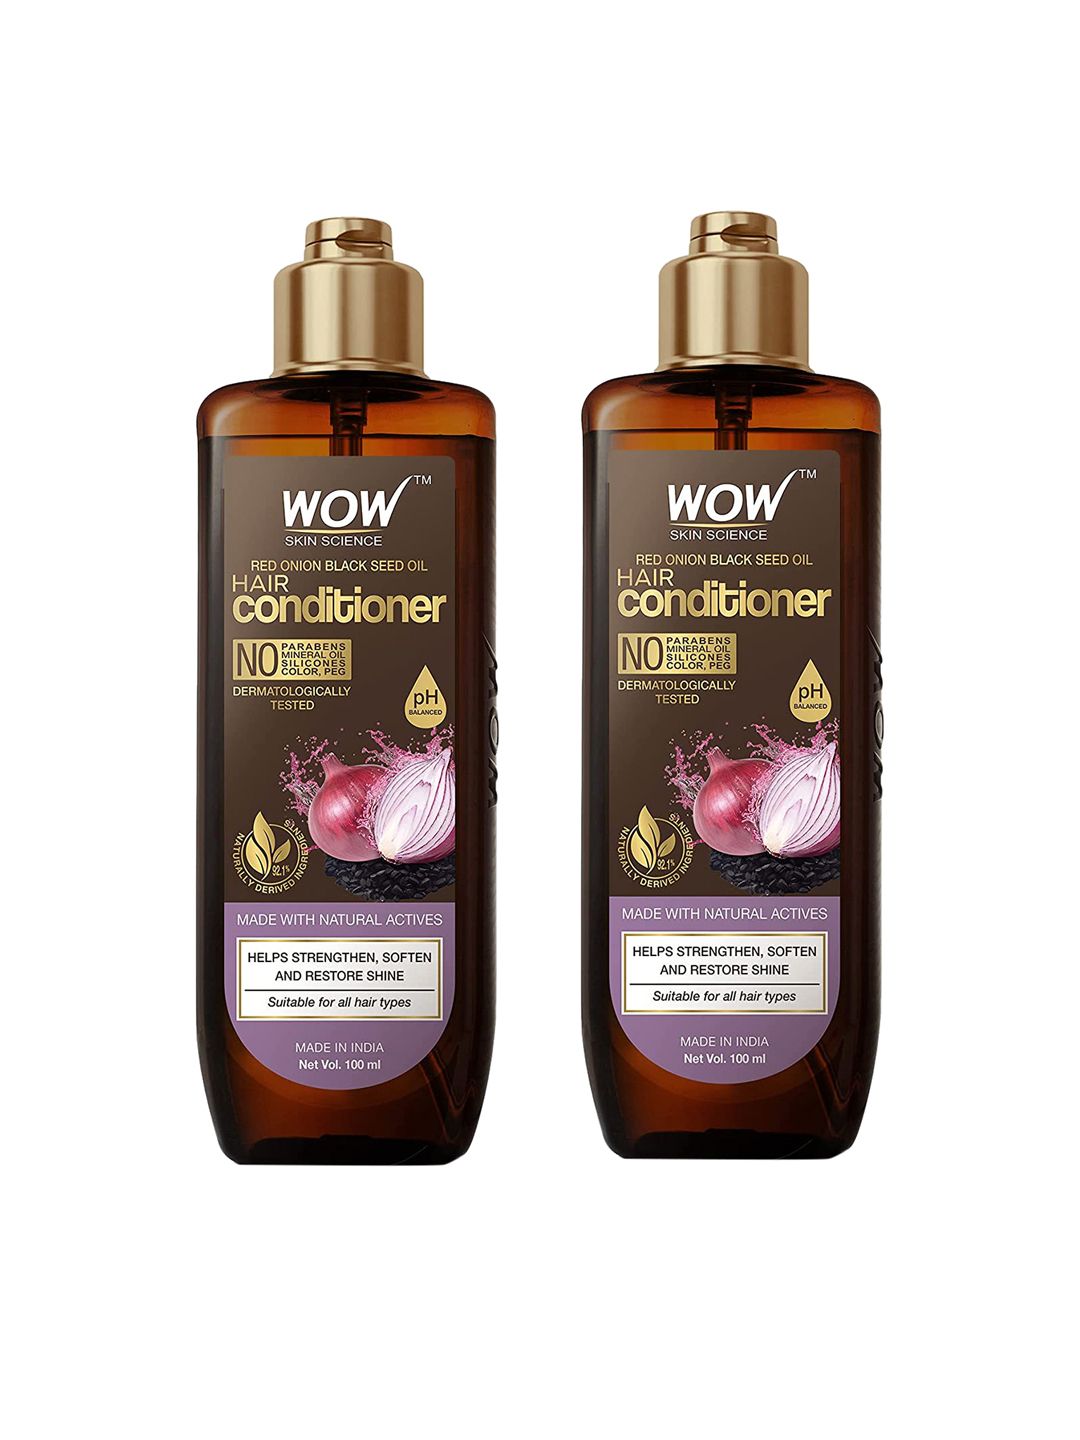 WOW SKIN SCIENCE Set of 2 Red Onion & Black Seed Oil Hair Conditioner - 100 ml each Price in India